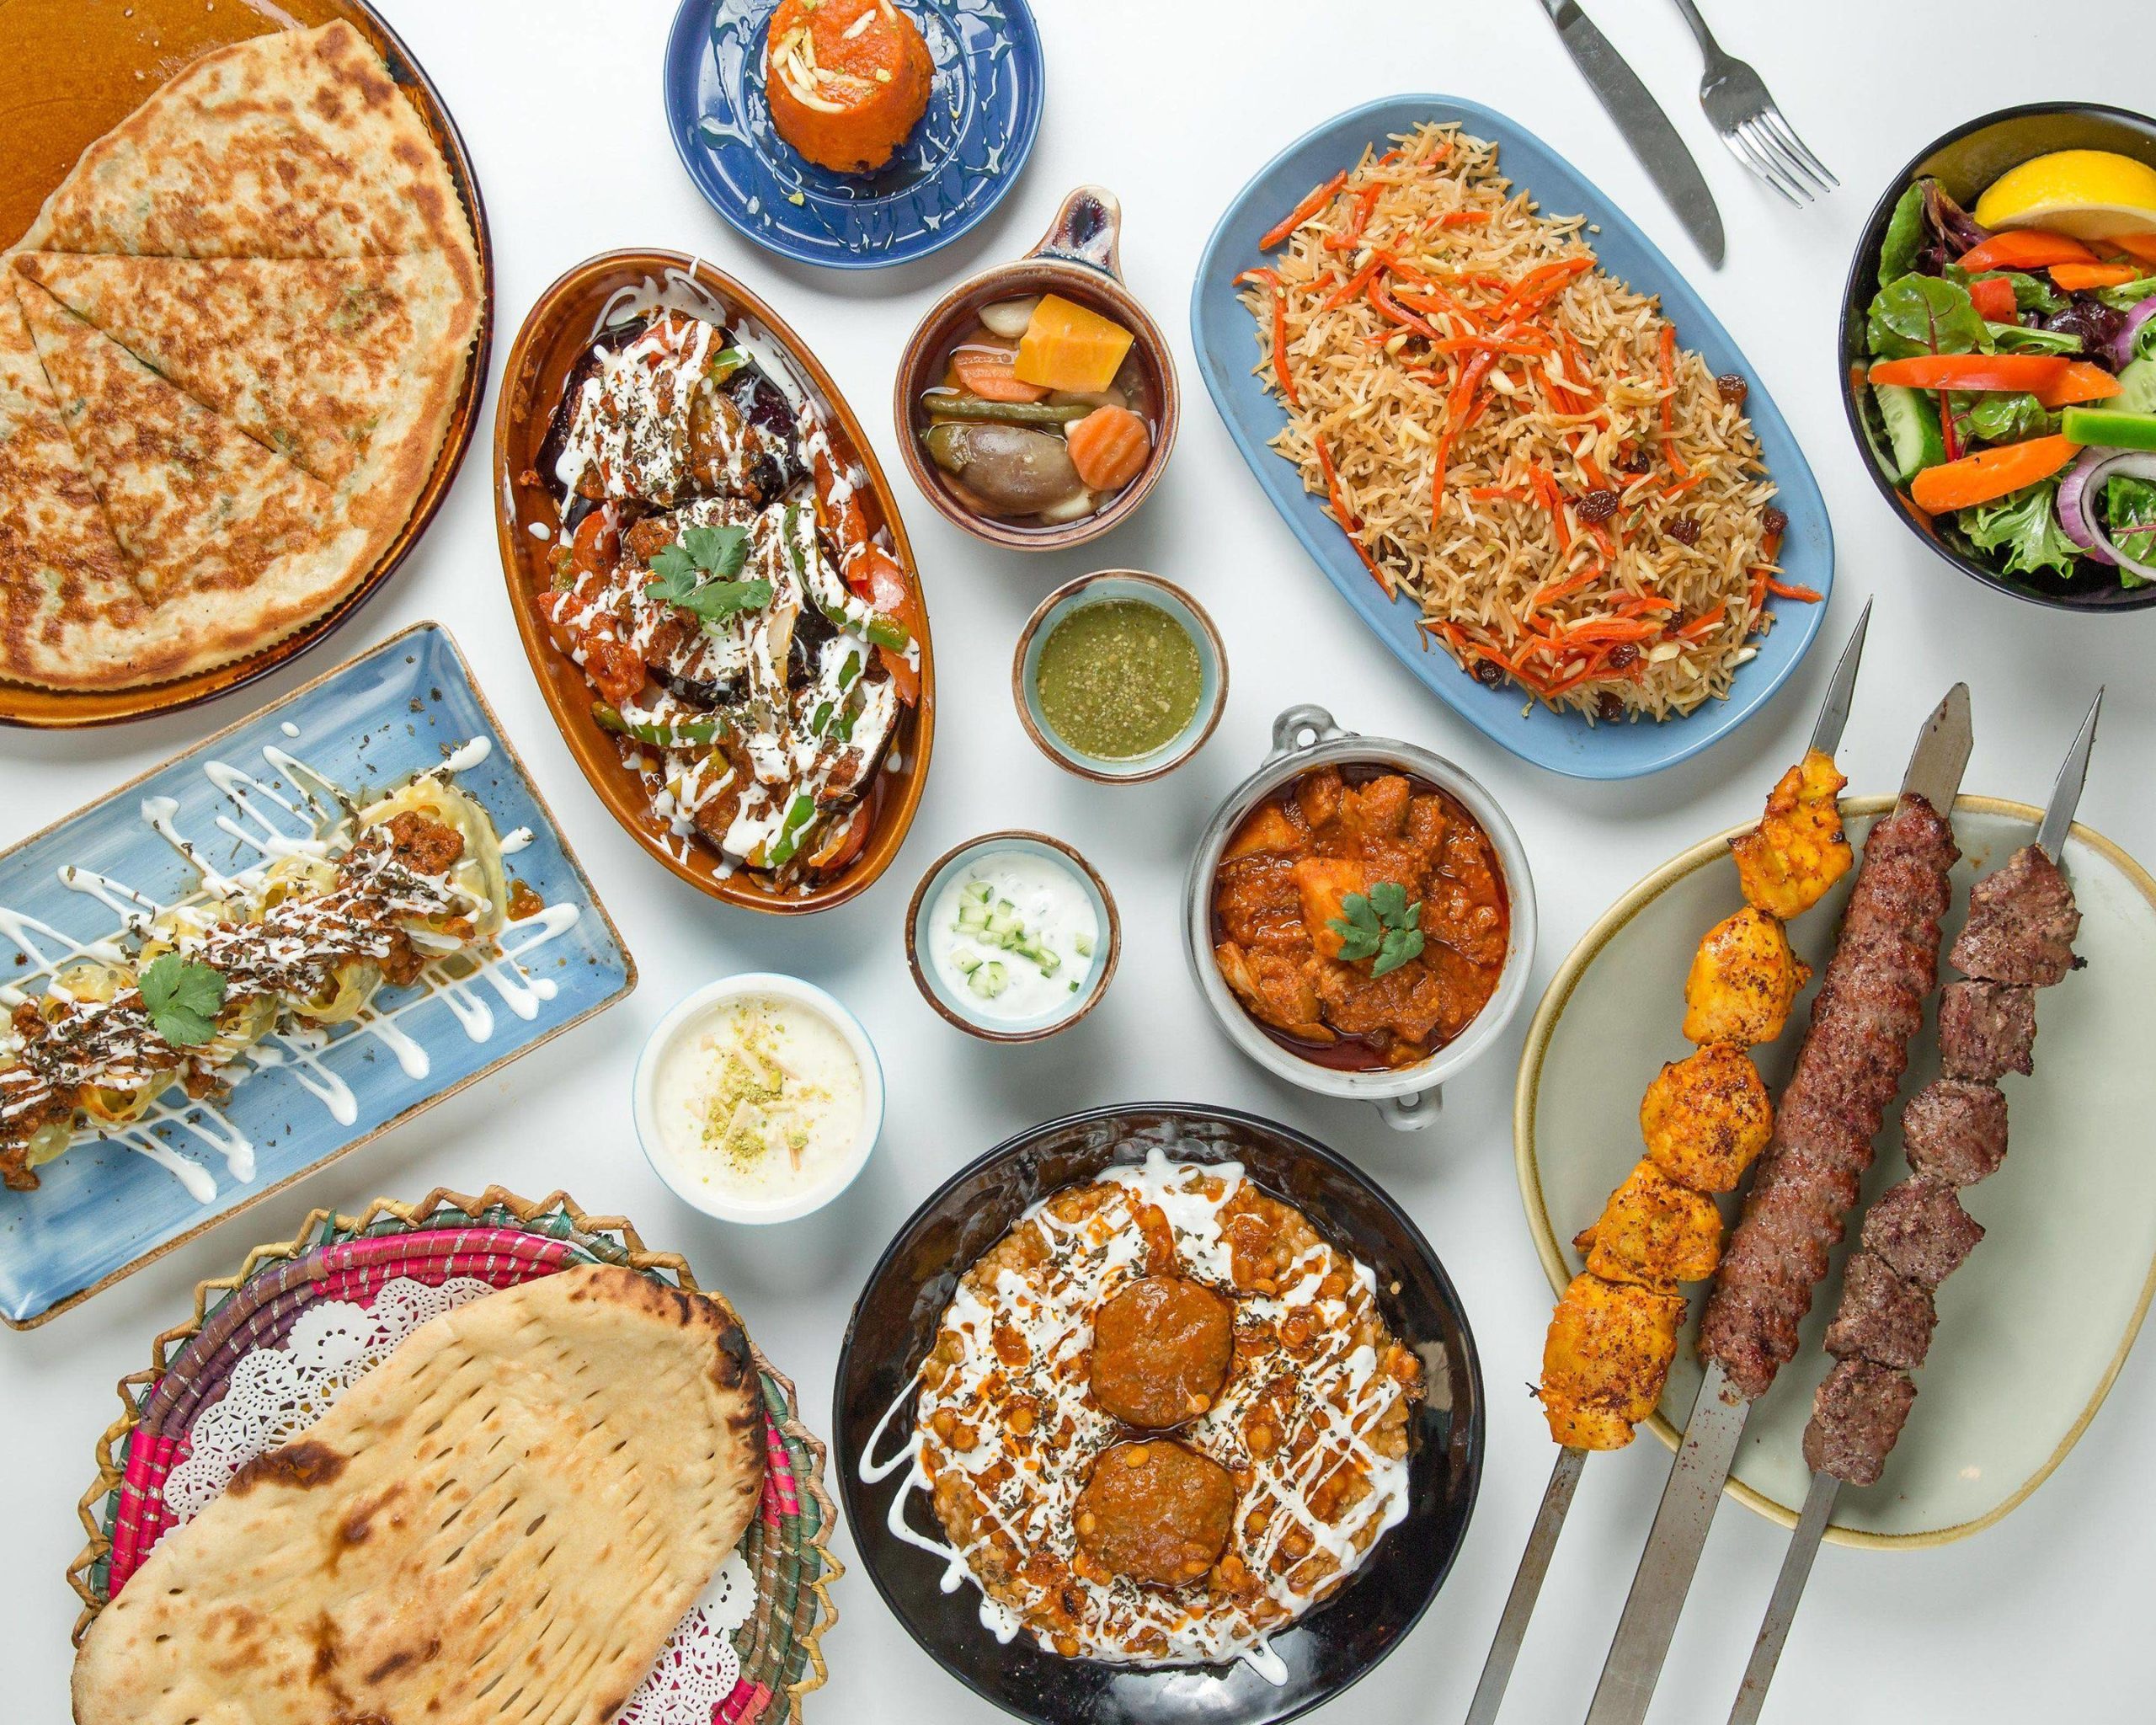 Top 10 Brisbane Restaurants You Need to Try This Ramadan During Iftar Time